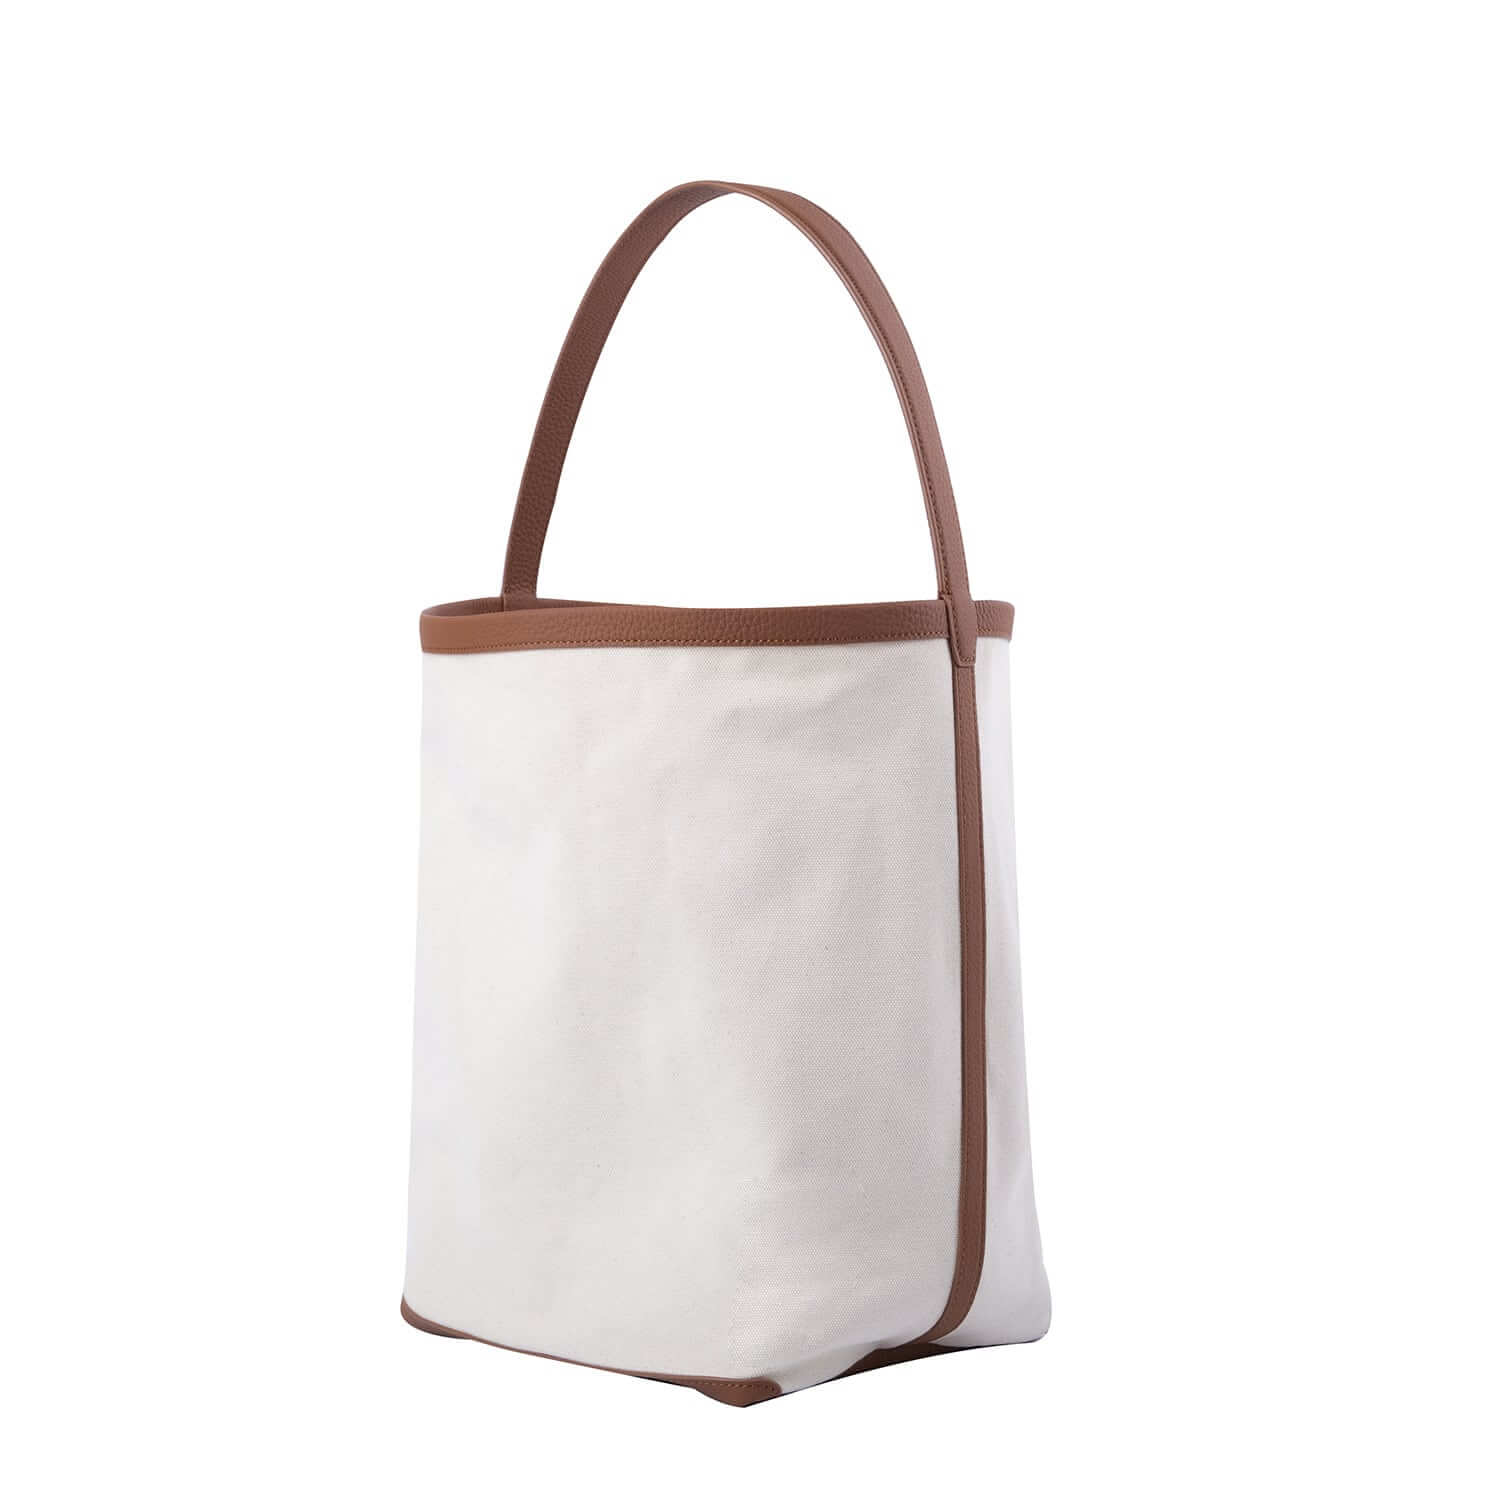 The Row The Row Park Tote Casual Style Calfskin A4 Leather Office Style  Elegant Style